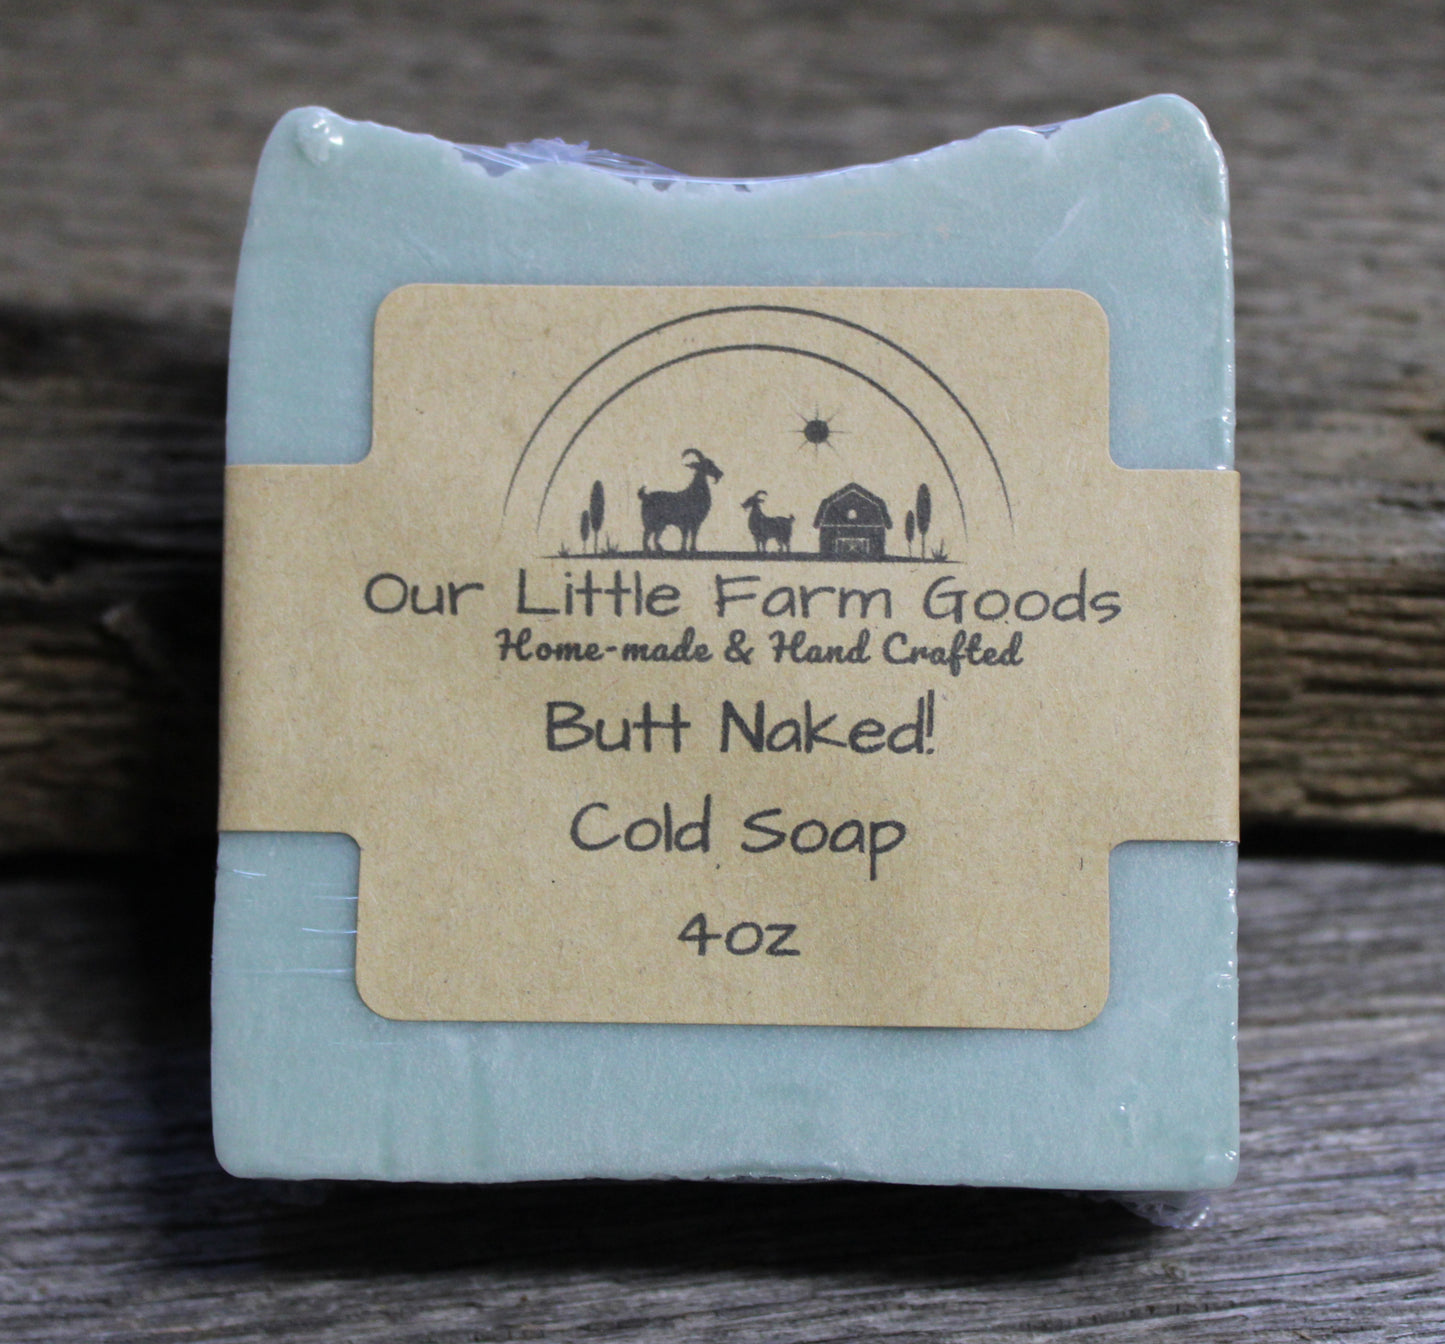 Butt Naked! Cold Process Soap Bars